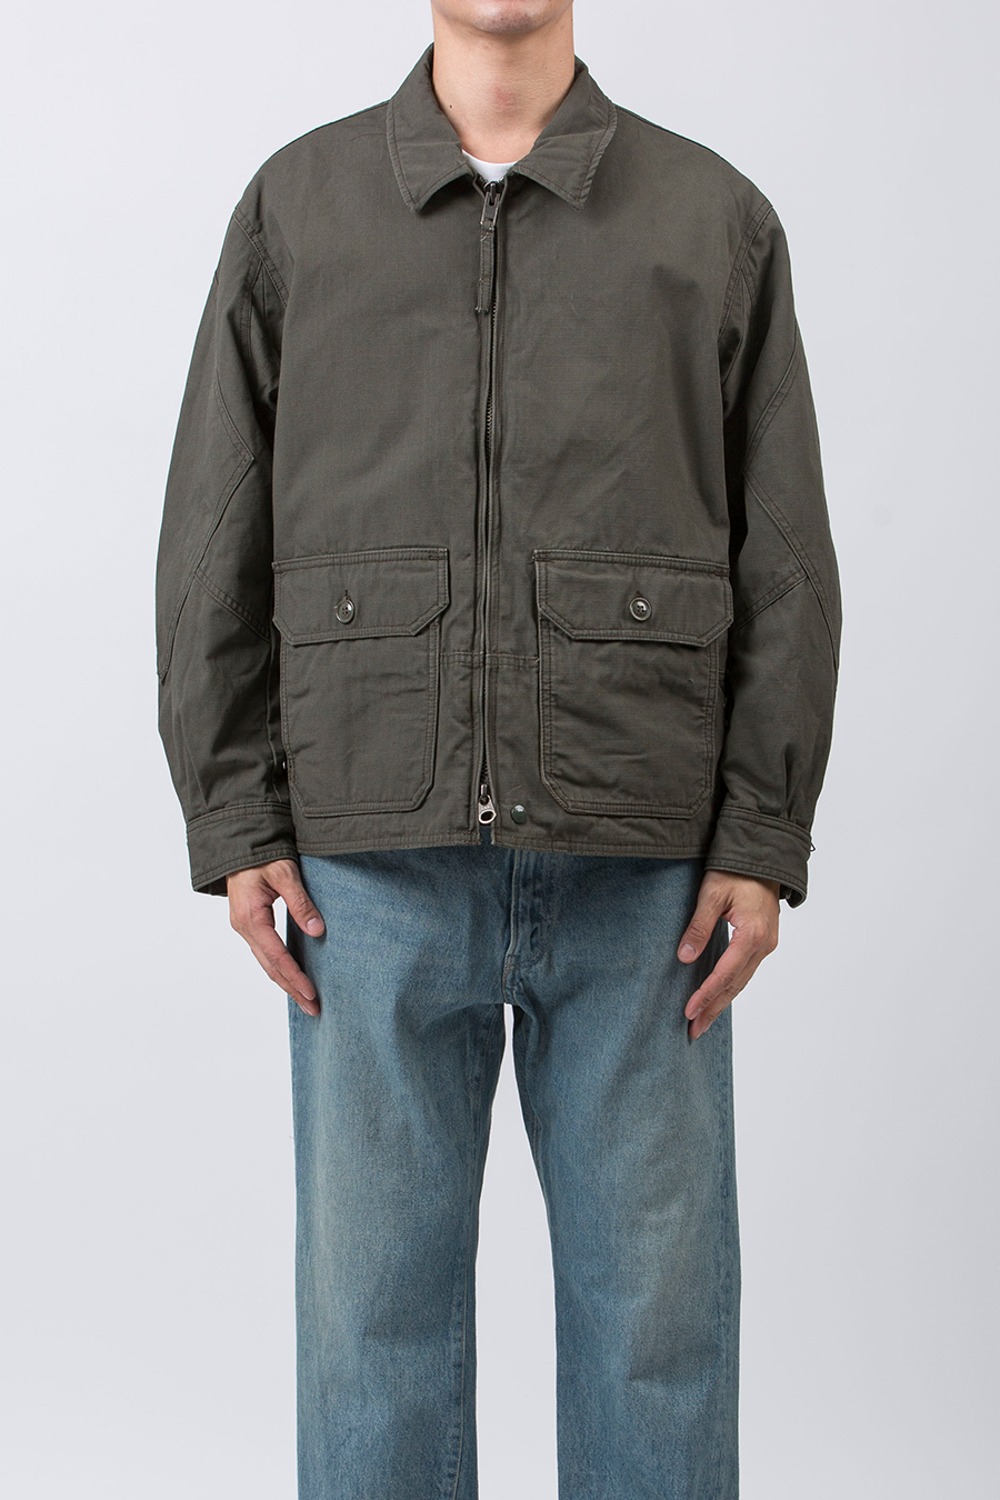 (23FW) G8 JACKET OLIVE HEAVYWEIGHT COTTON RIPSTOP